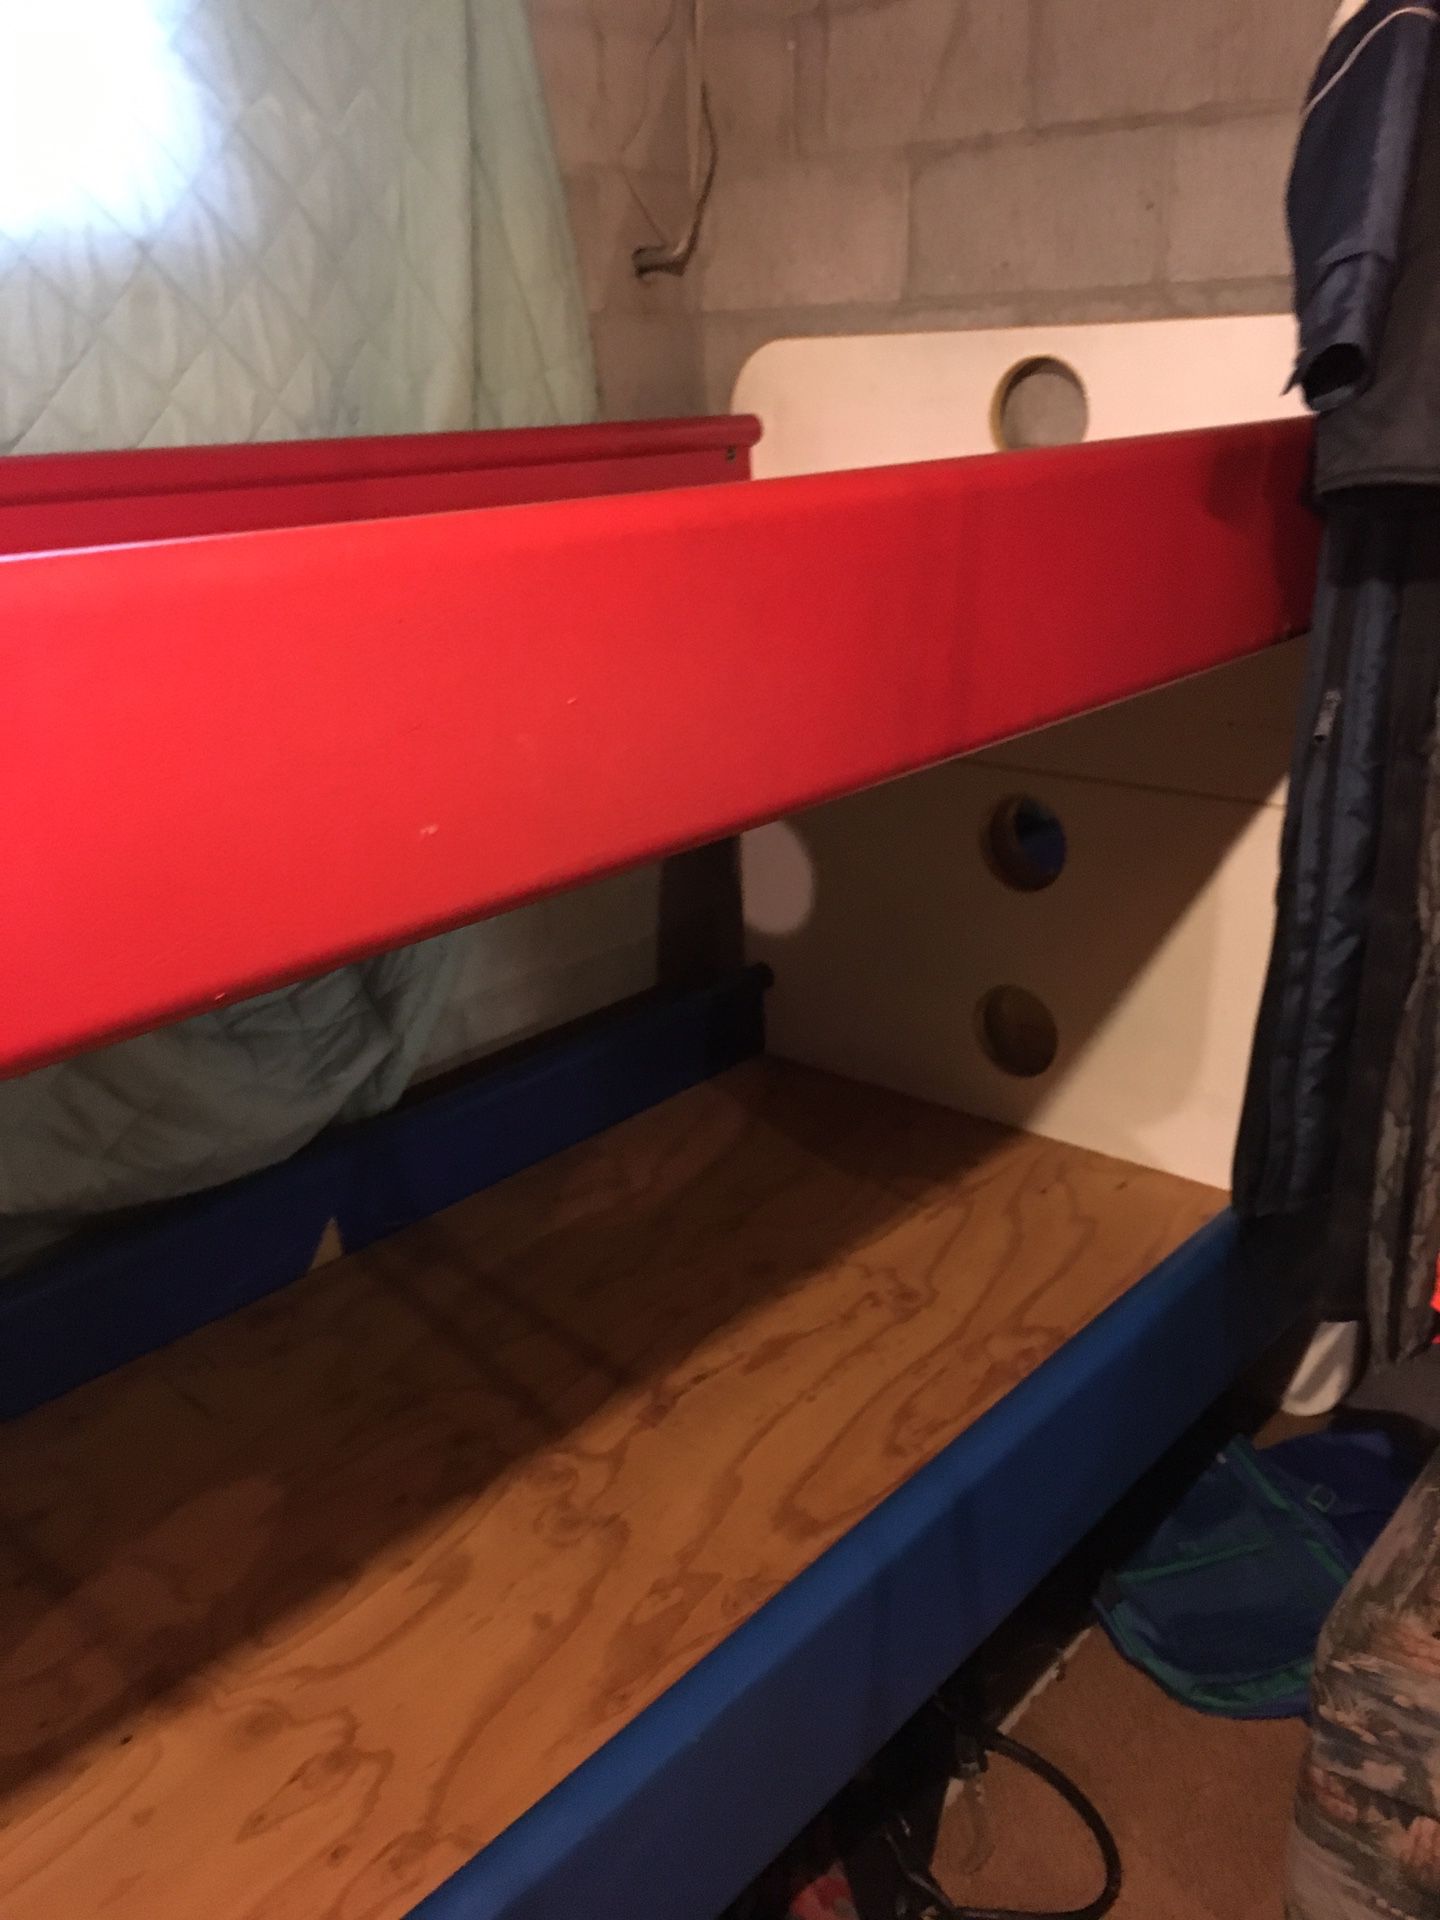 Bunkbeds with mattresses